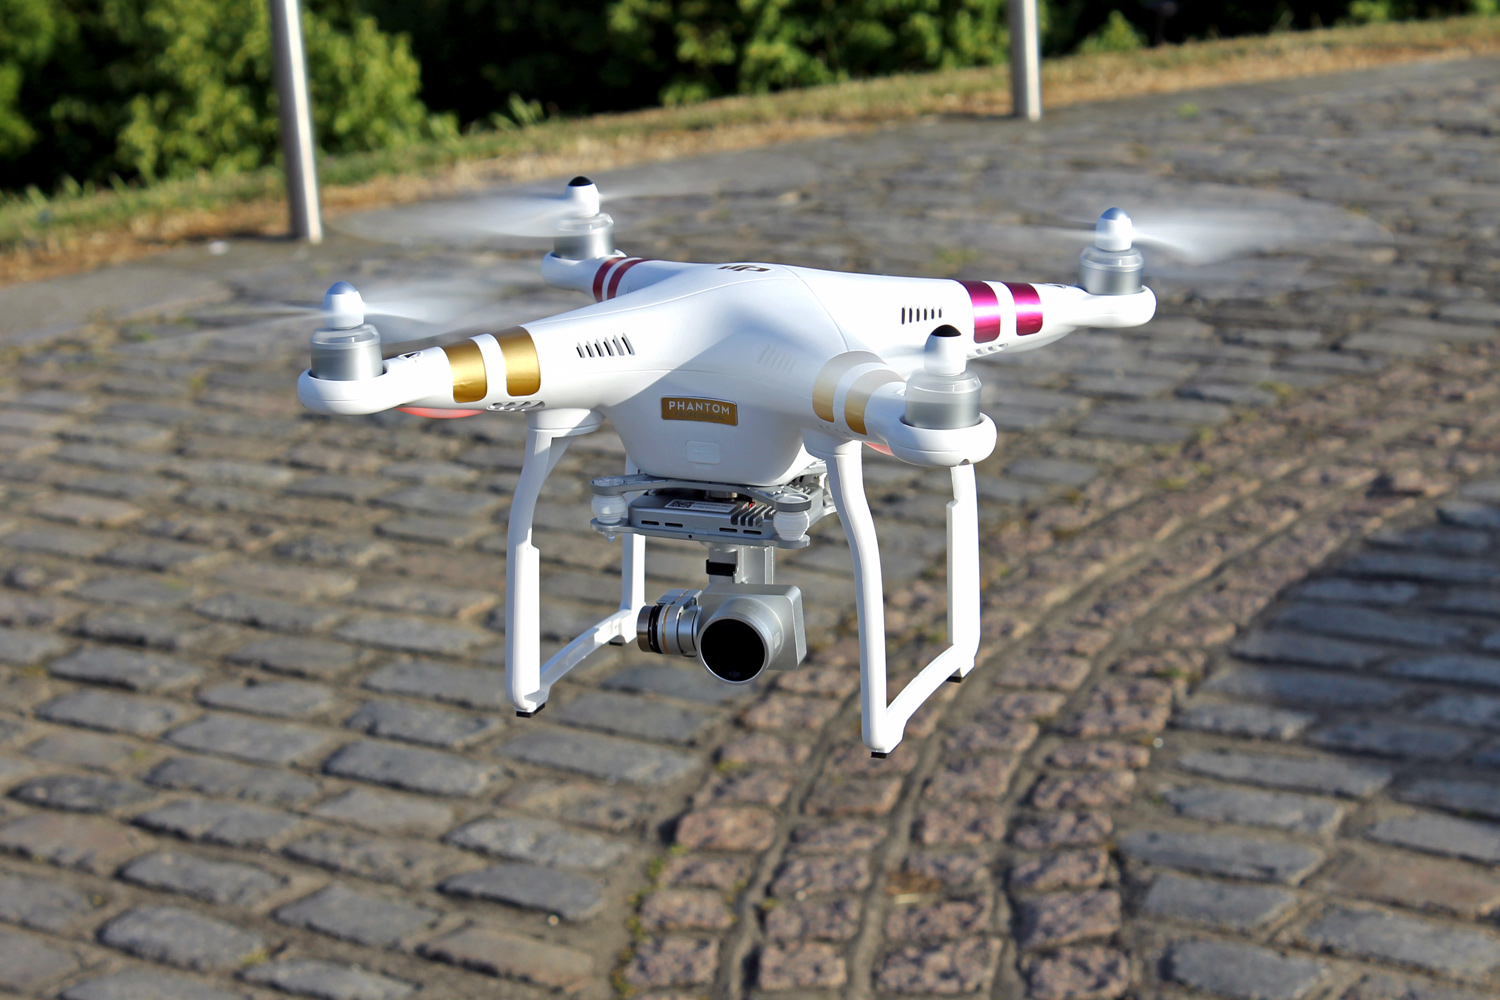 DJI Phantom 3 Professional review: The 4K drone perfect for